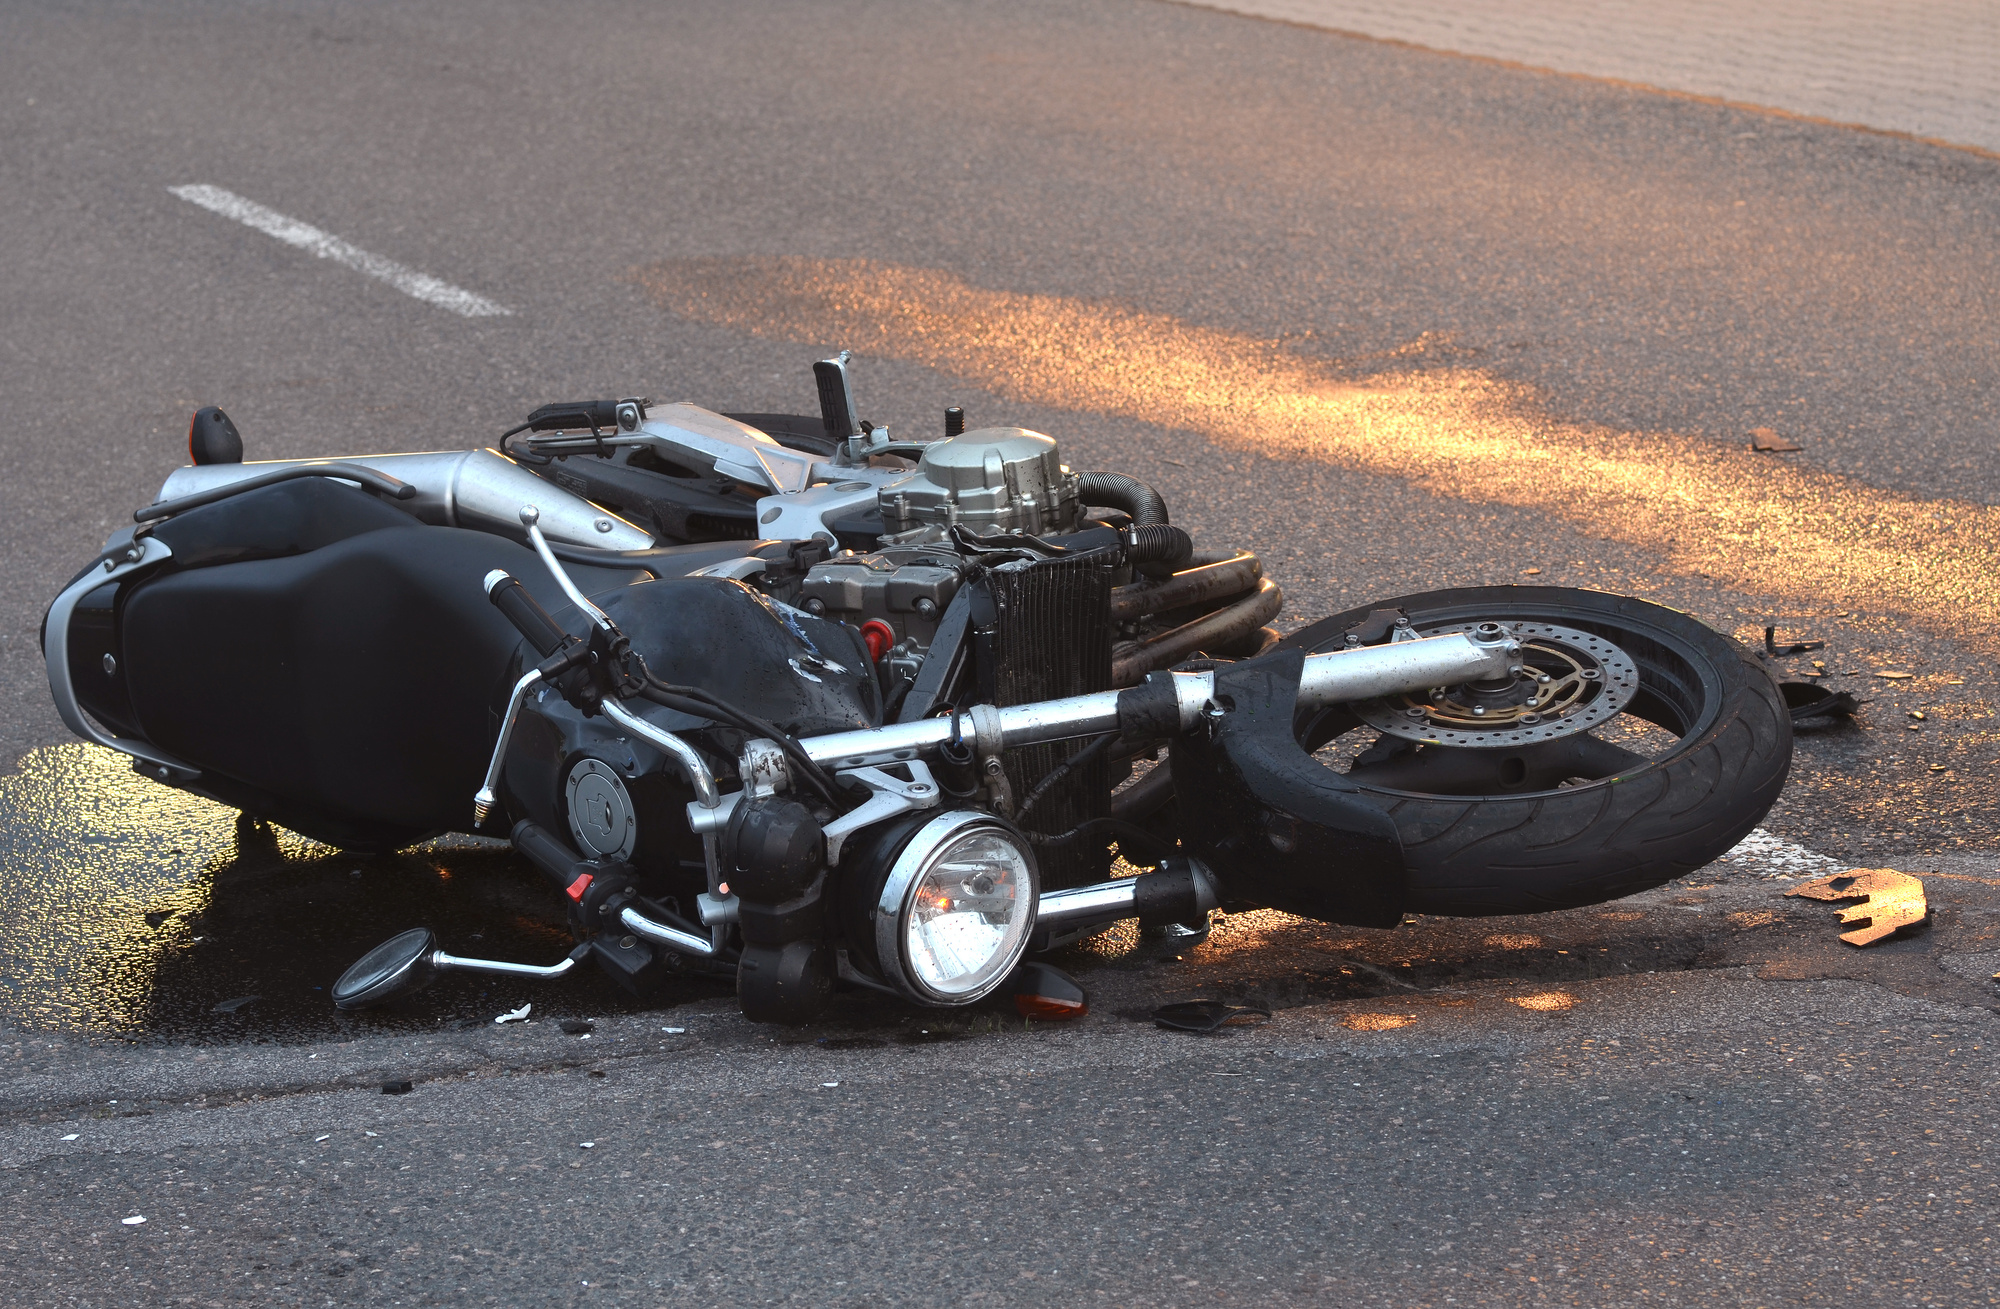 Motorcycles are a great way to get around, but safety is a must. Click here for the top 3 causes of motorcycle accidents and ways to avoid them.